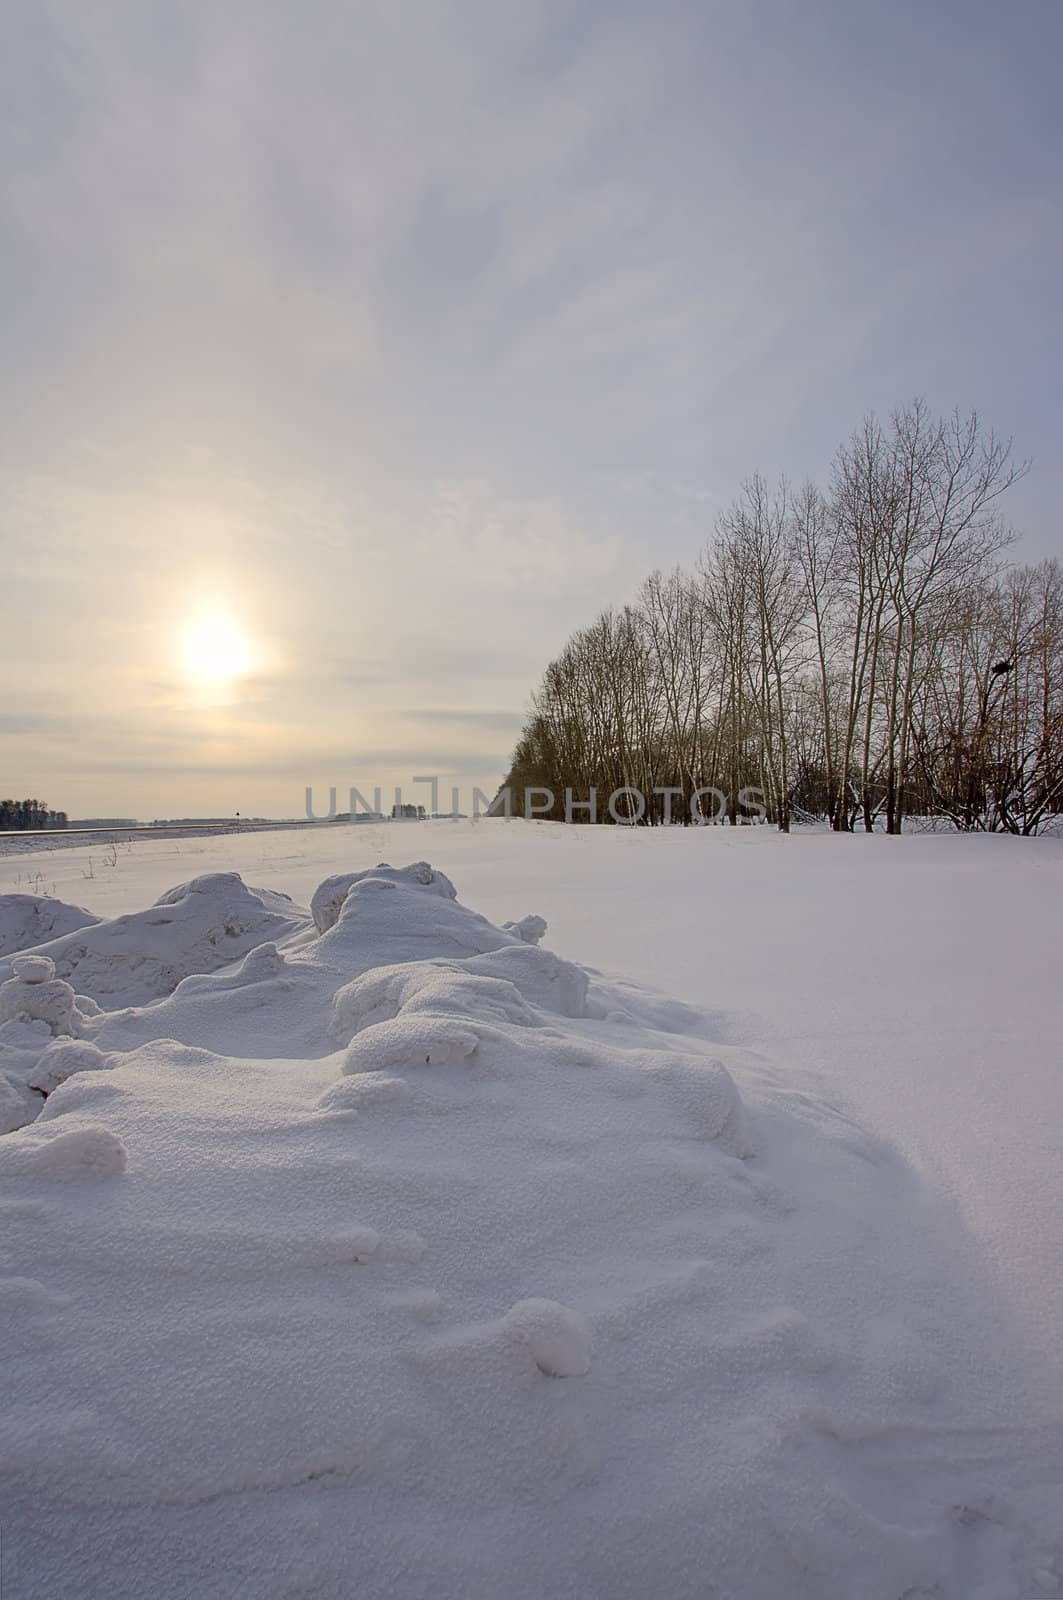 Landscape with snow space and sunset in winter, Russia